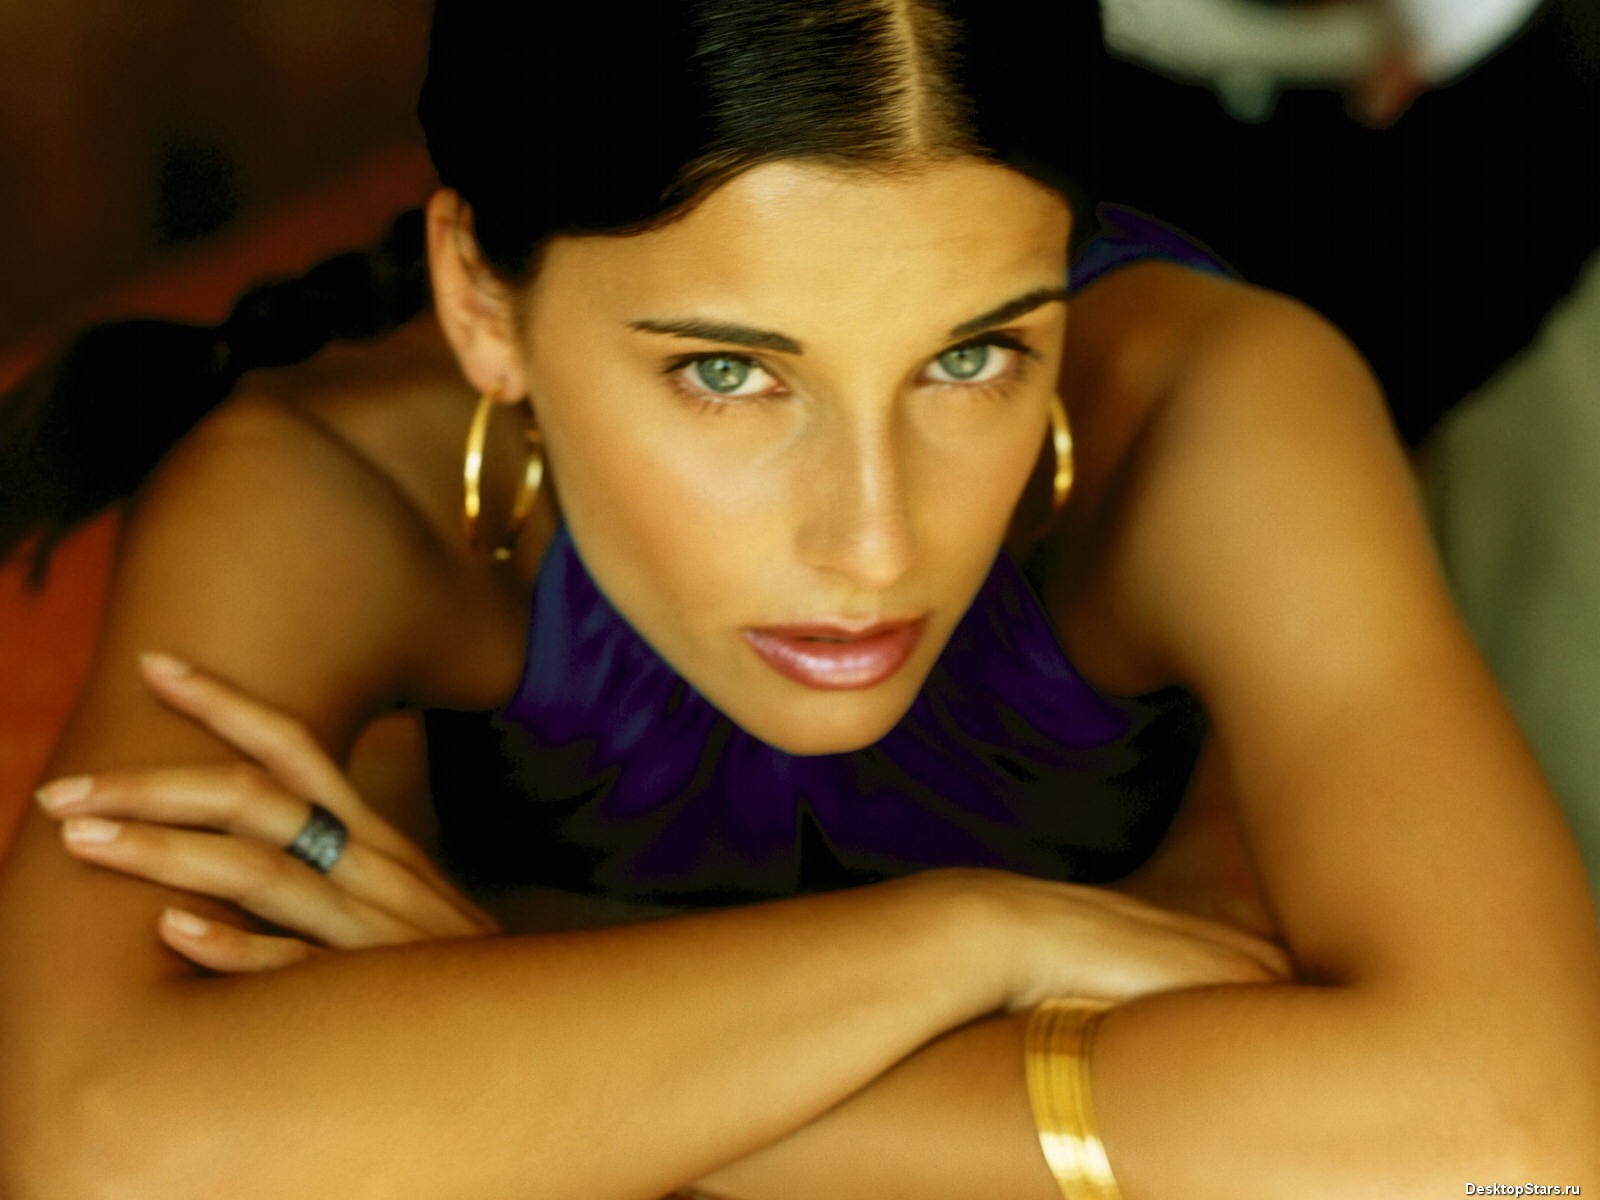 Nelly Furtado #010 - 1600x1200 Wallpapers Pictures Photos Images